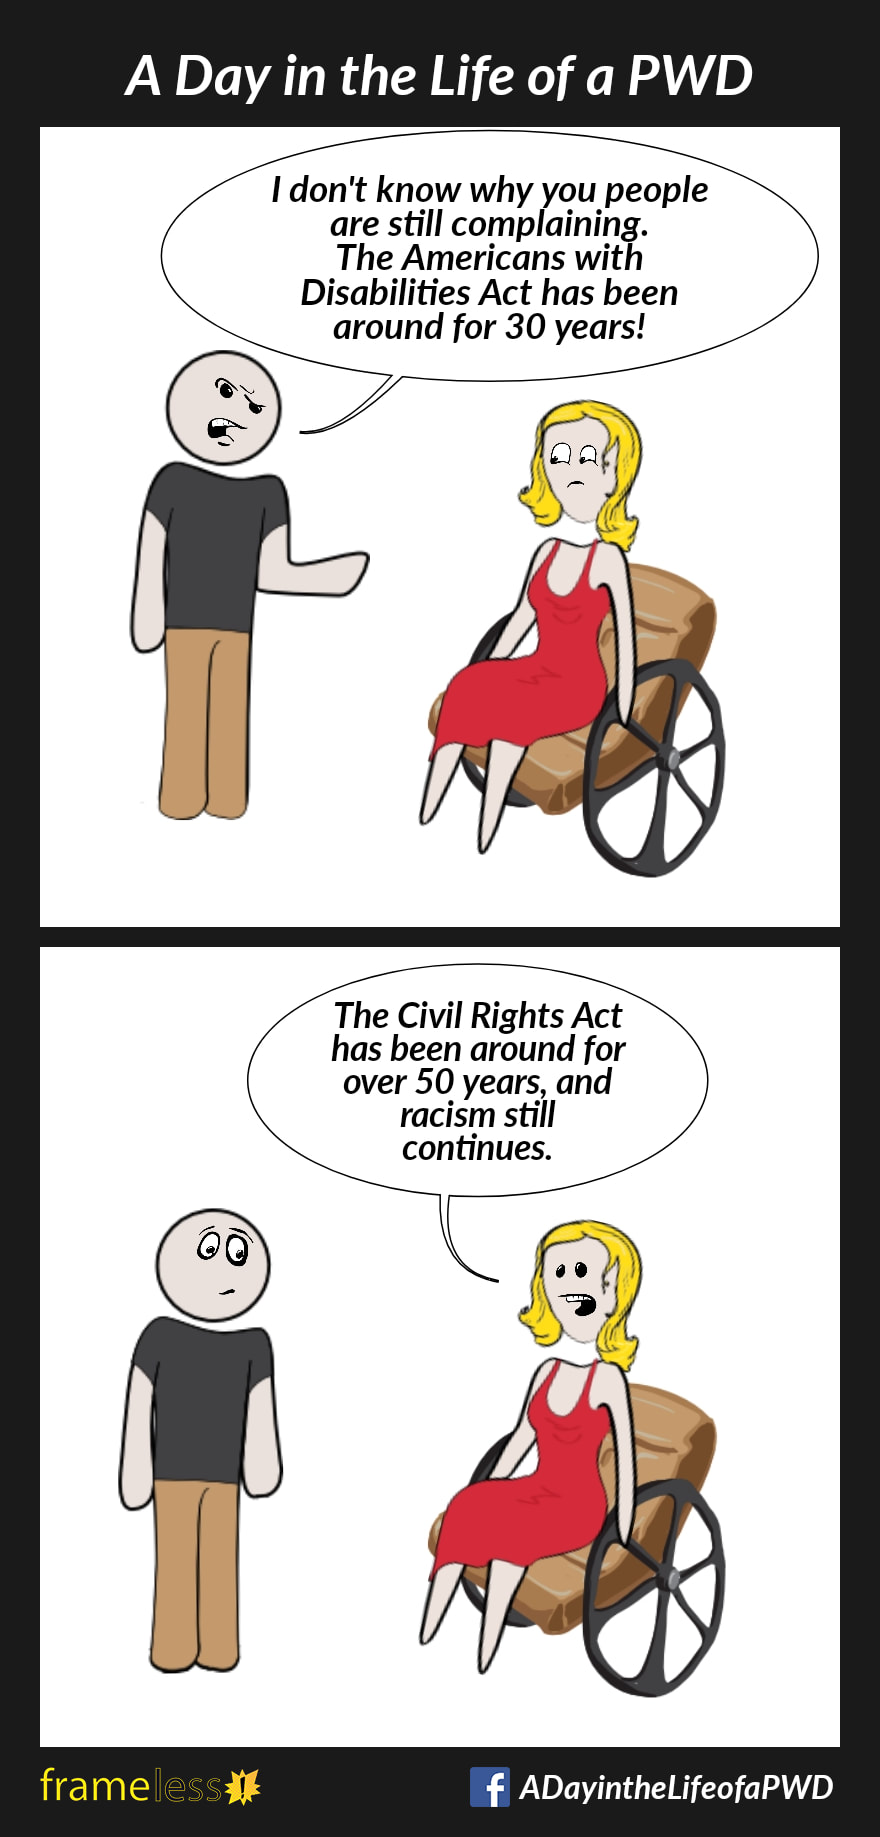 Frame 1: A woman in a wheelchair and a man are chatting.MAN: I don't know why you people are still complaining. The Americans with Disabilities Act has been around for 30 years!Frame 2:WOMAN: The Civil Rights Act has been around for over 50 years, and racism still continues.